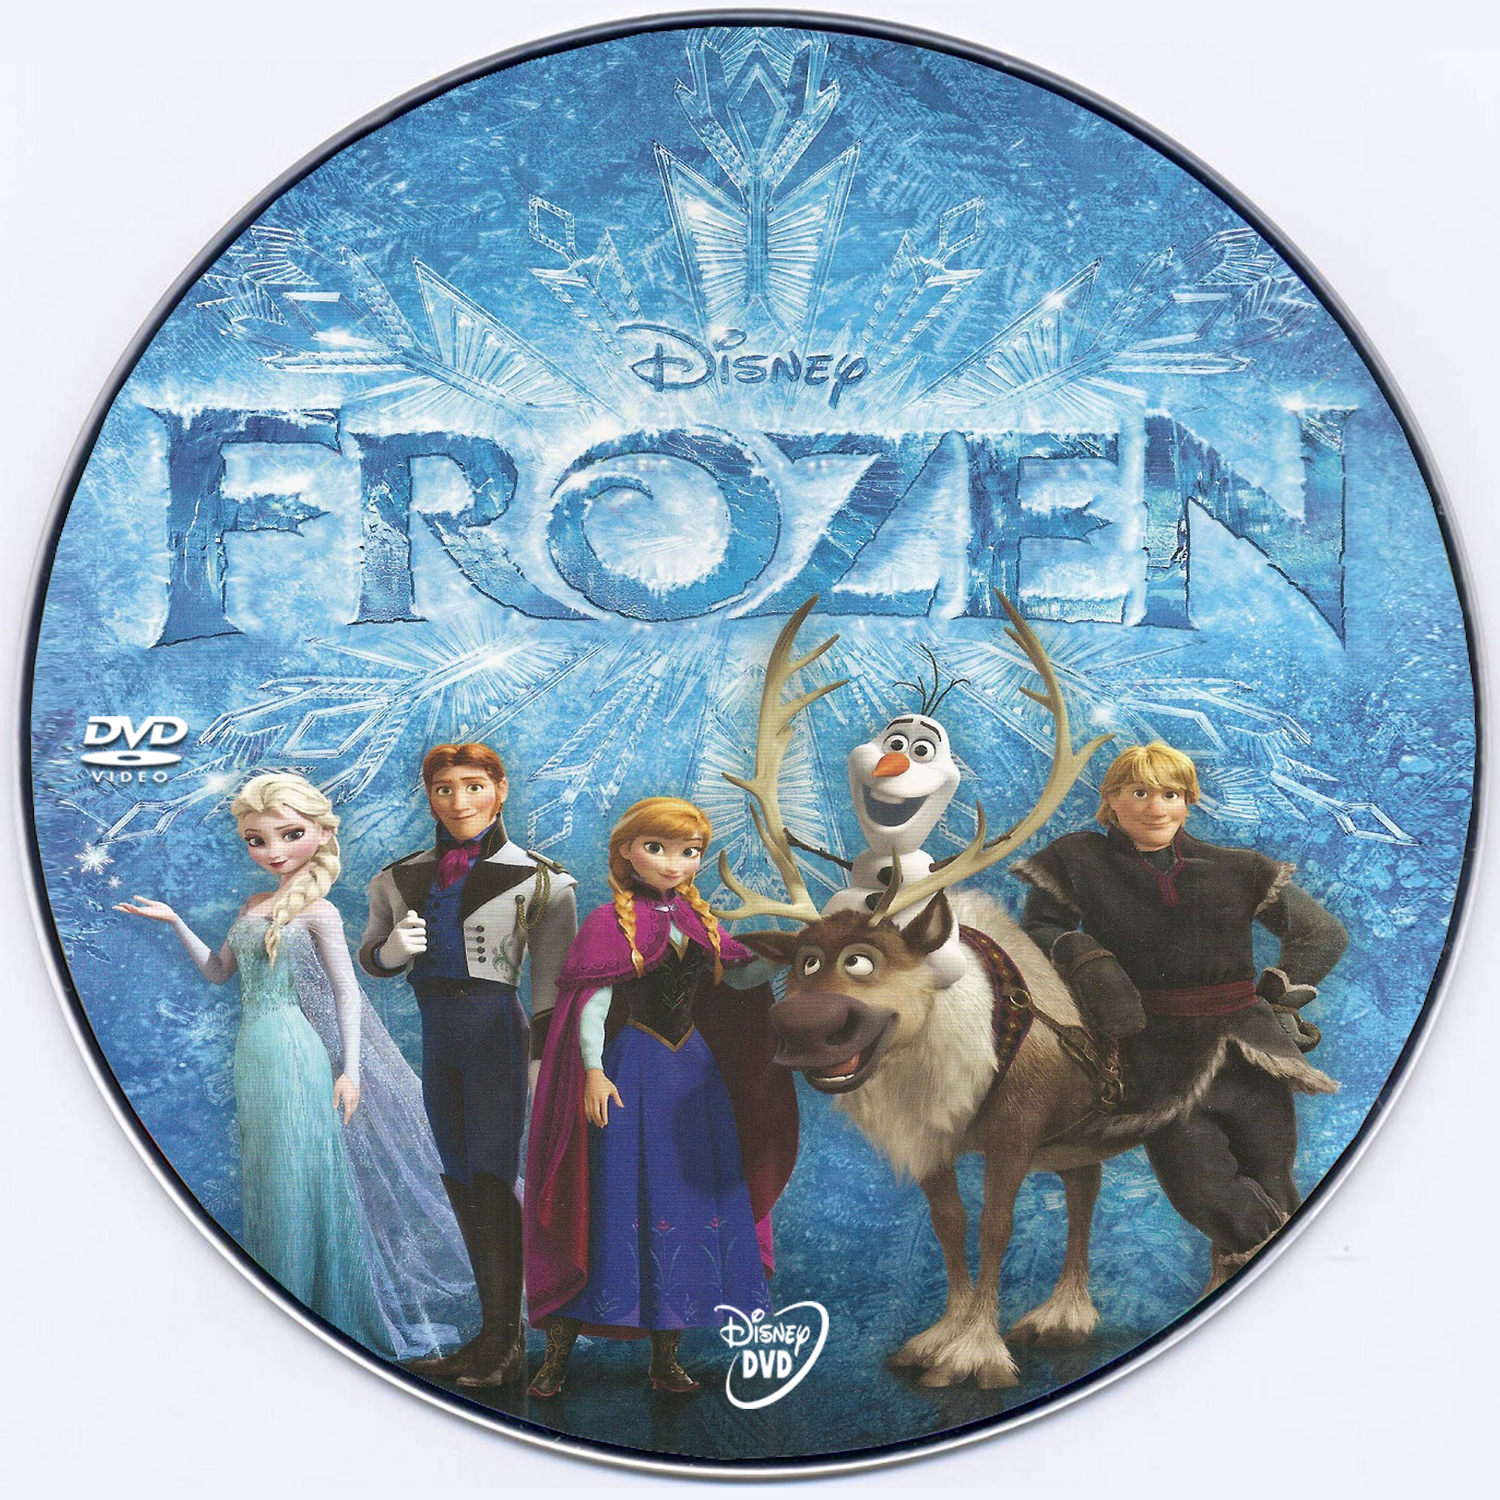 Disney Frozen Cd Dvd Covers Cover Century Over 500 000 Album Art Covers For Free